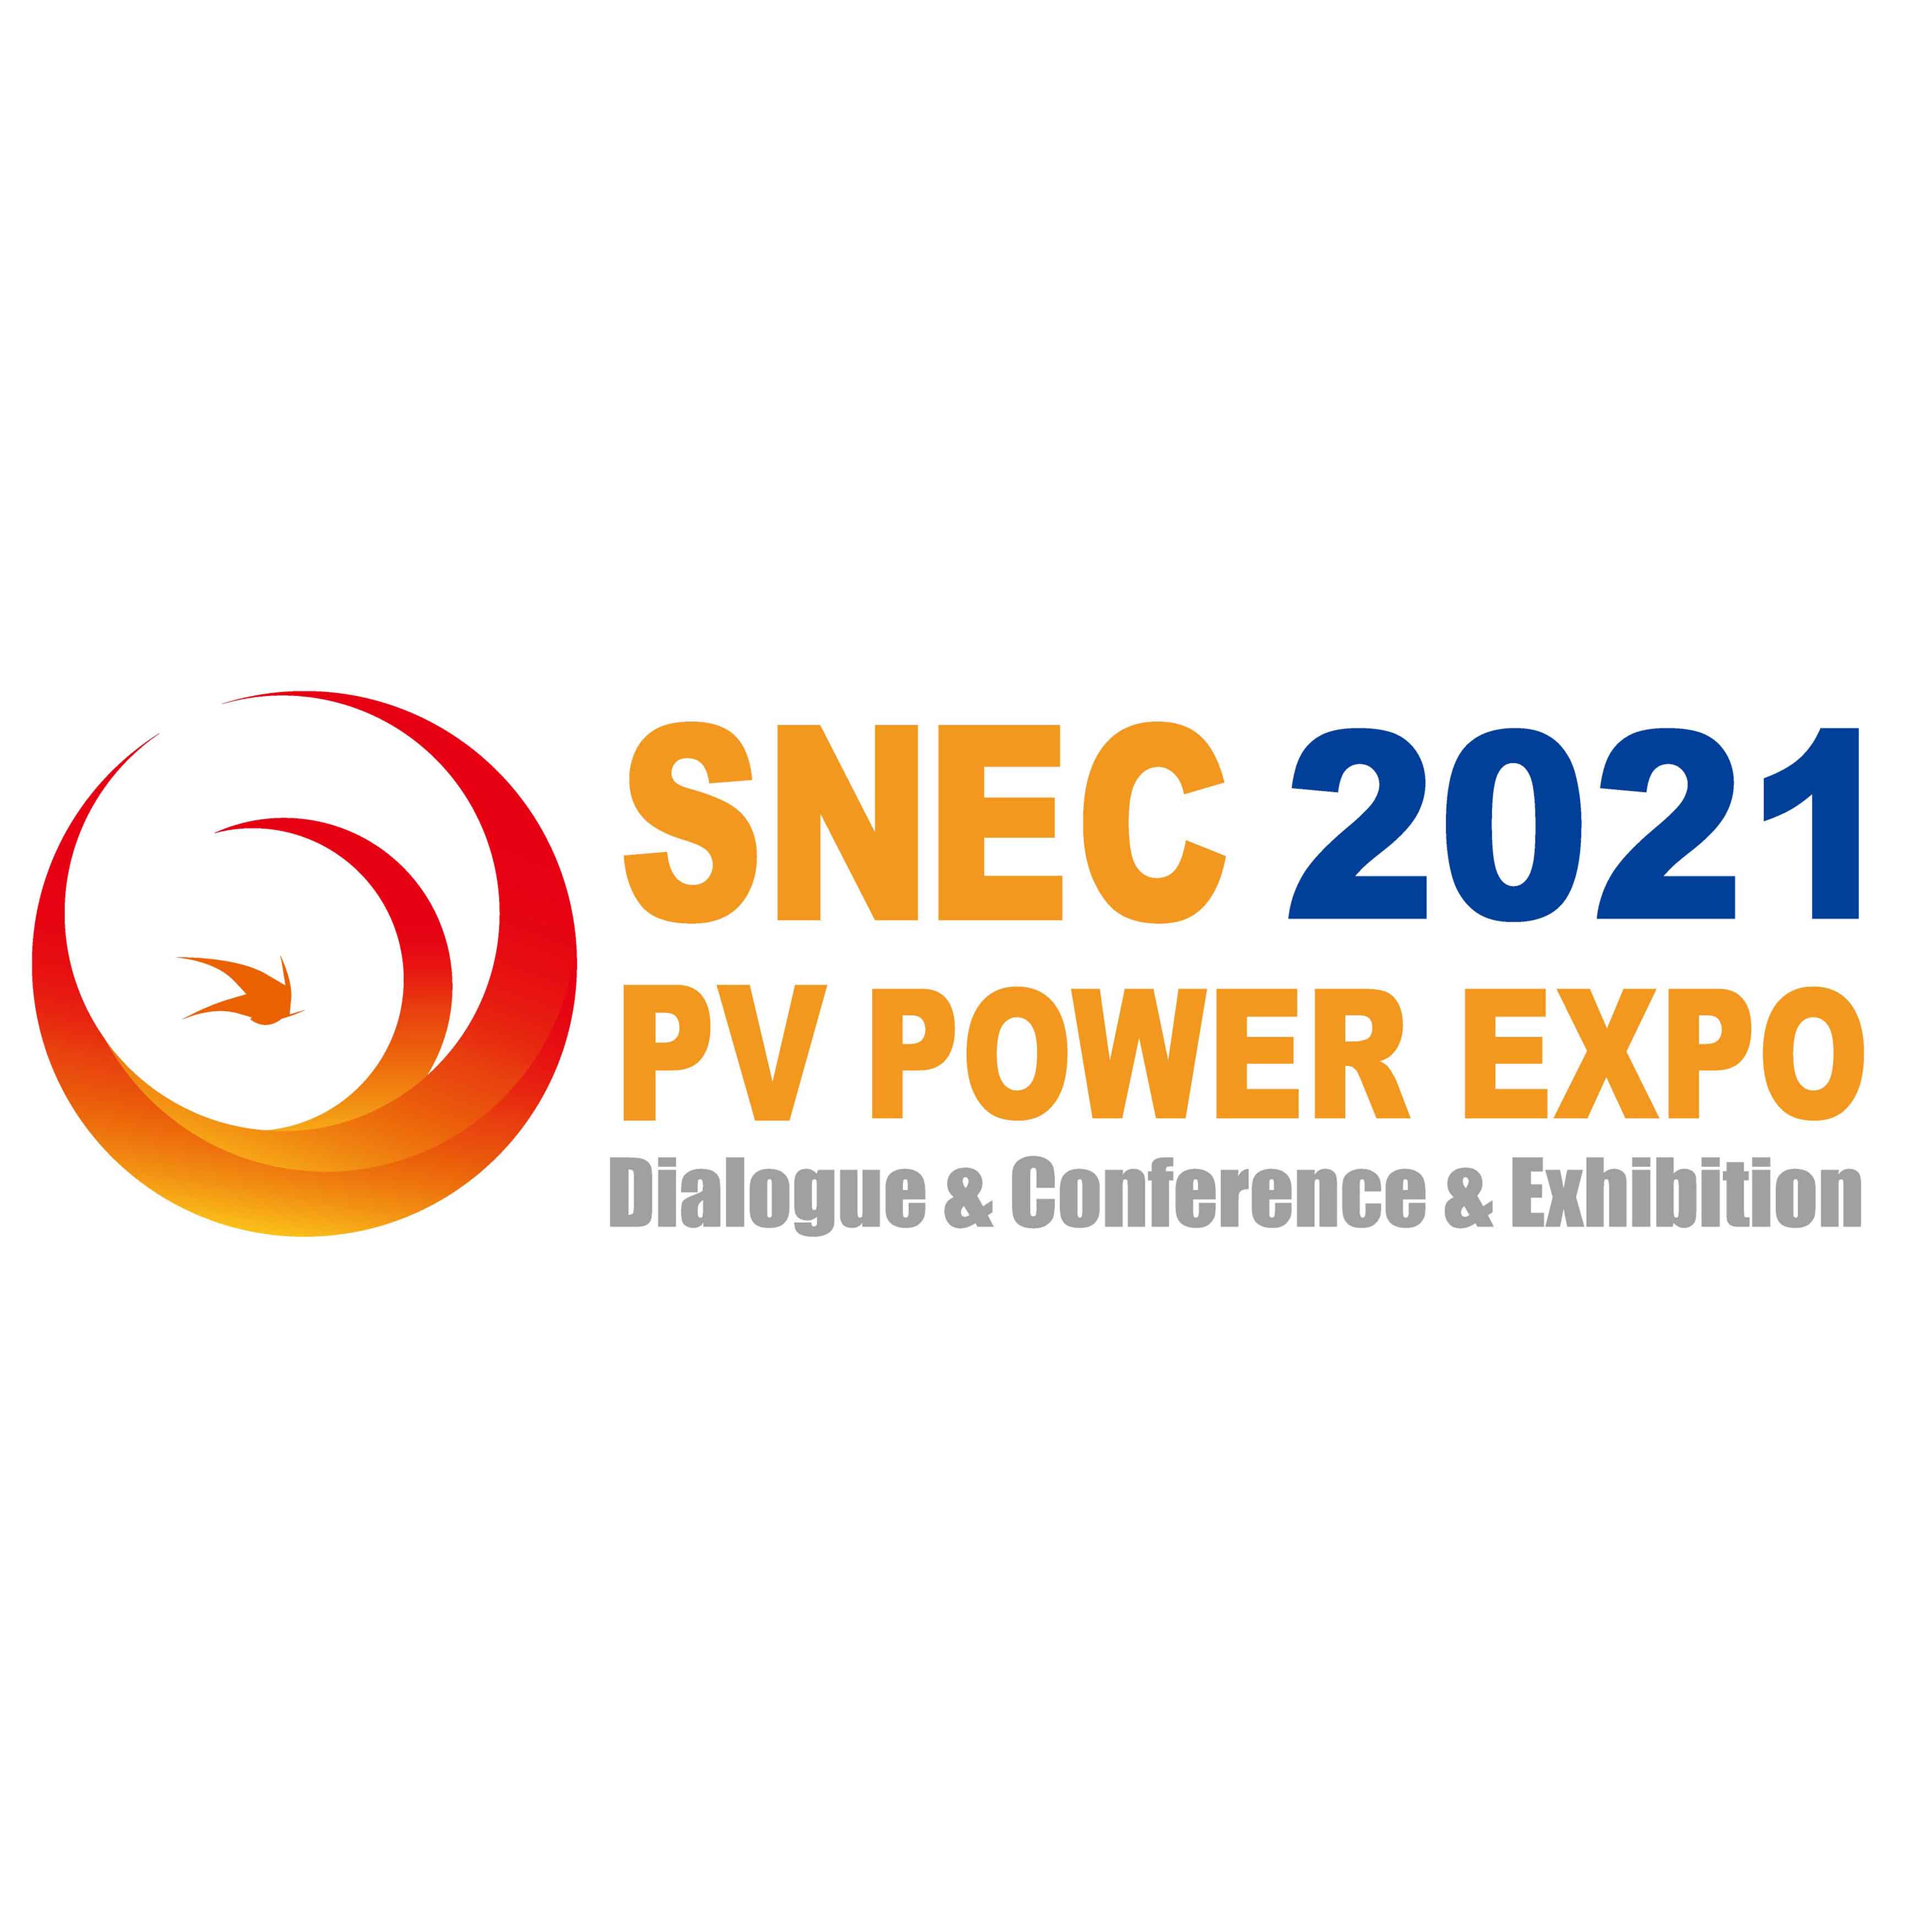 SNEC 15th (2021) International Photovoltaic Power Generation and Smart Energy Conference & Exhibition [SNEC PV POWER EXPO] will be held in Shanghai China on June 3-5, 2021